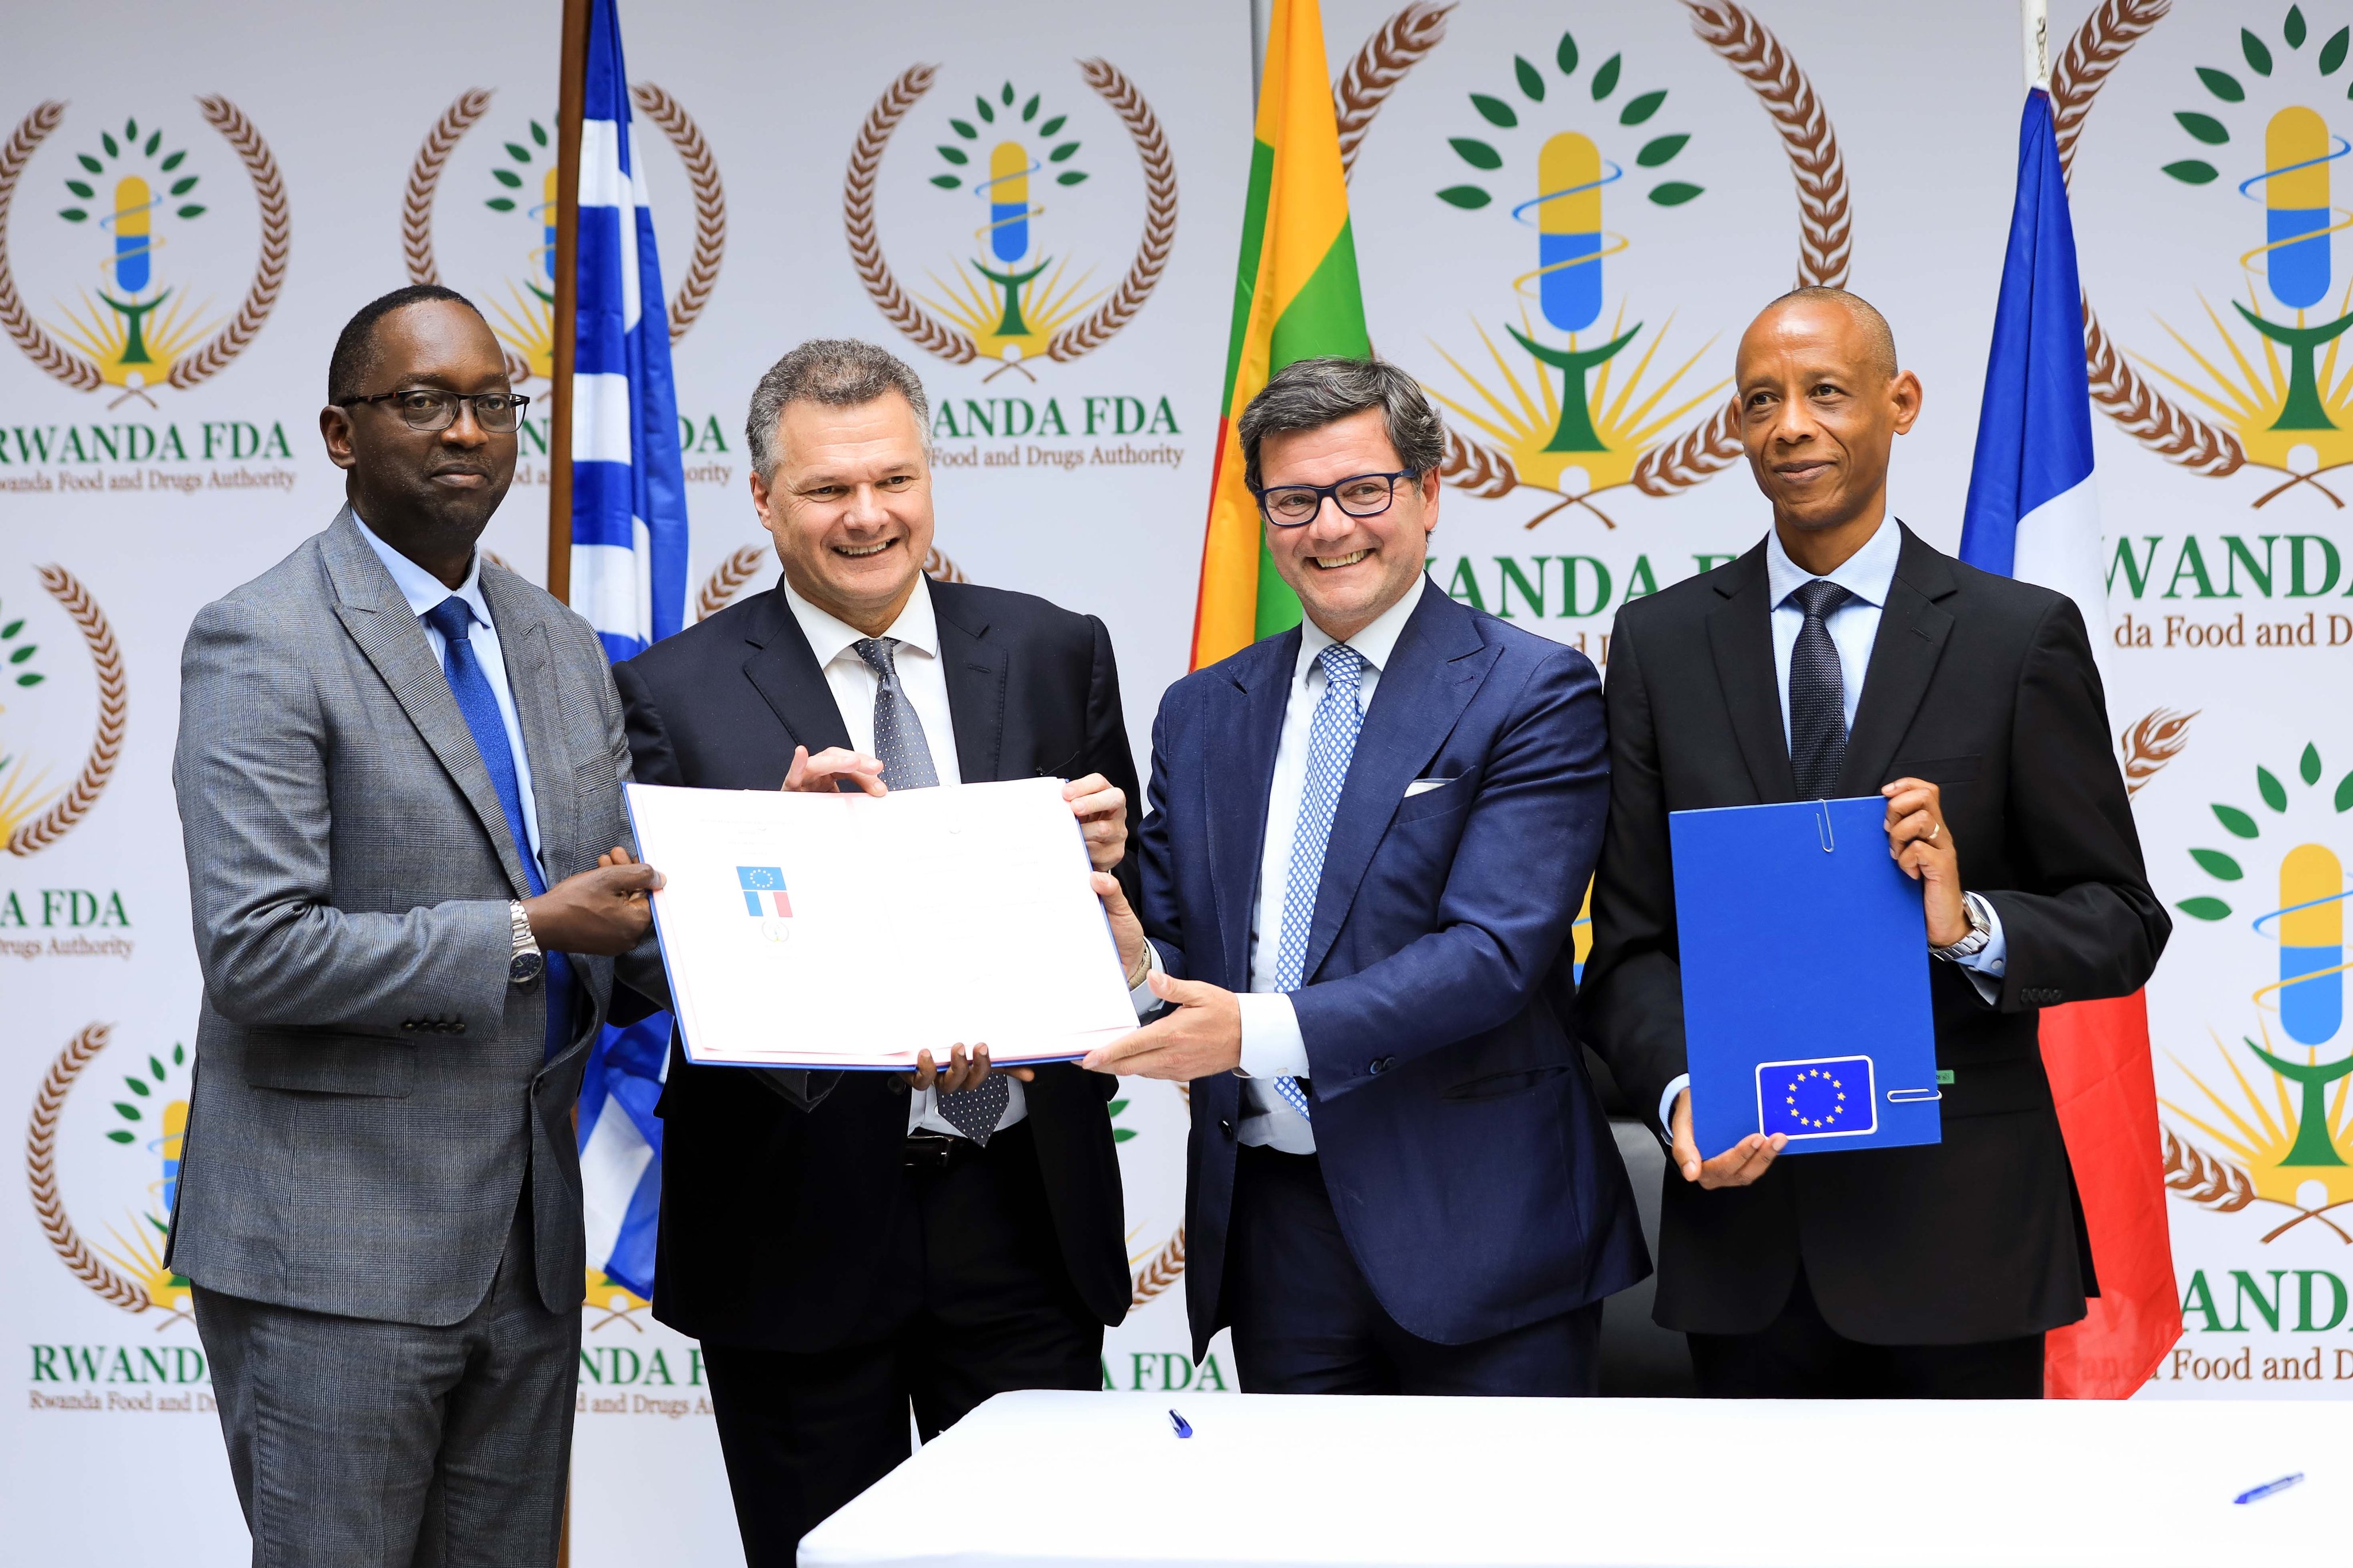 (L-R)Minister of Health Dr Daniel Ngamije,   Antoine Anfre, the Ambassador of France to Rwanda,  Nicola Bellomo, the EU Ambassador and Dr Emile Bienvenu, the Director General of the Rwanda FDA after signing the agreement  in Kigali on Wednesday, June 22. Courtesy